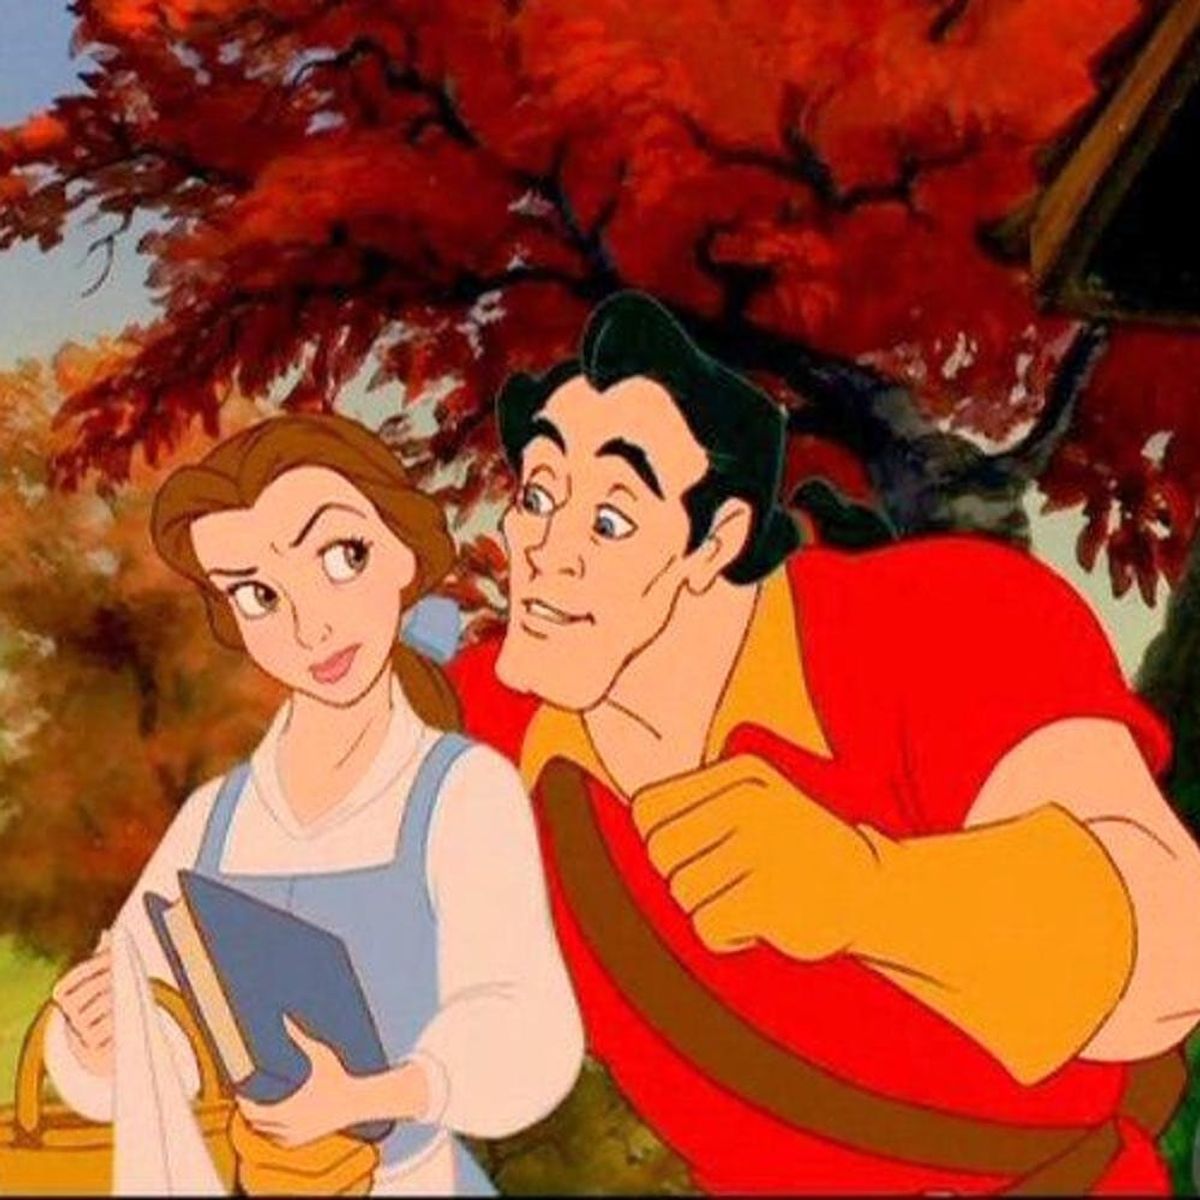 Belle and Gaston Face Off in This Fairytale-Like New Pic from Disney’s Live-Action Beauty and the Beast